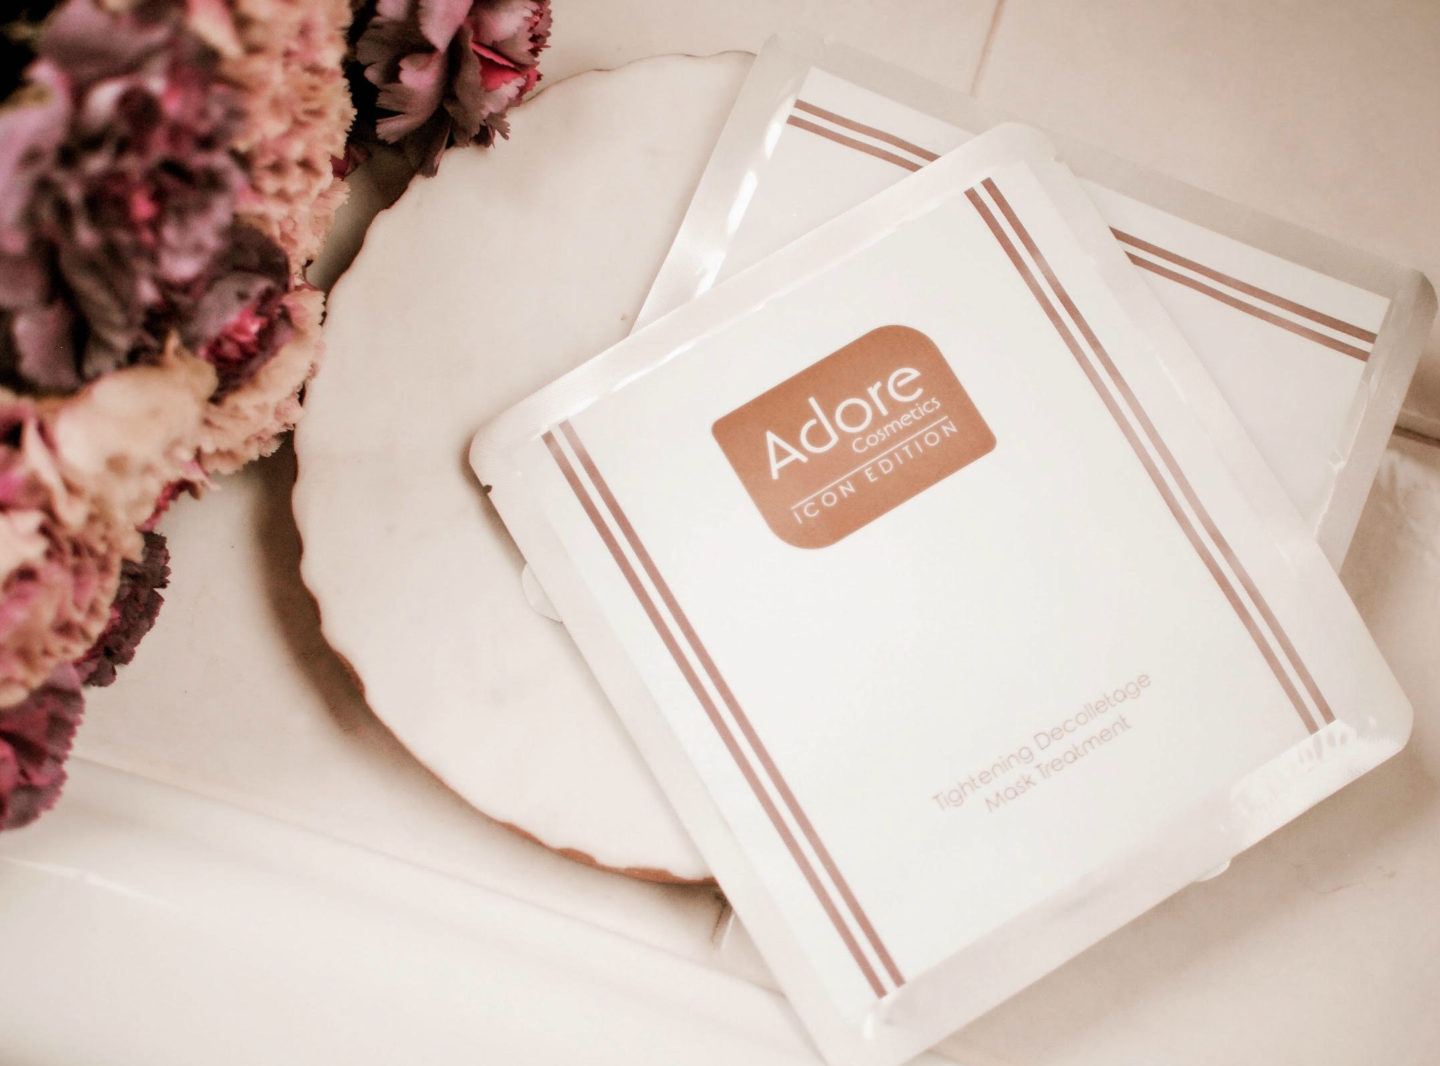 Vanessa-Lambert-Winter-Skincare-Routine-Adore-Cosmetics-Review-Tightening Décolletage Mask Treatment